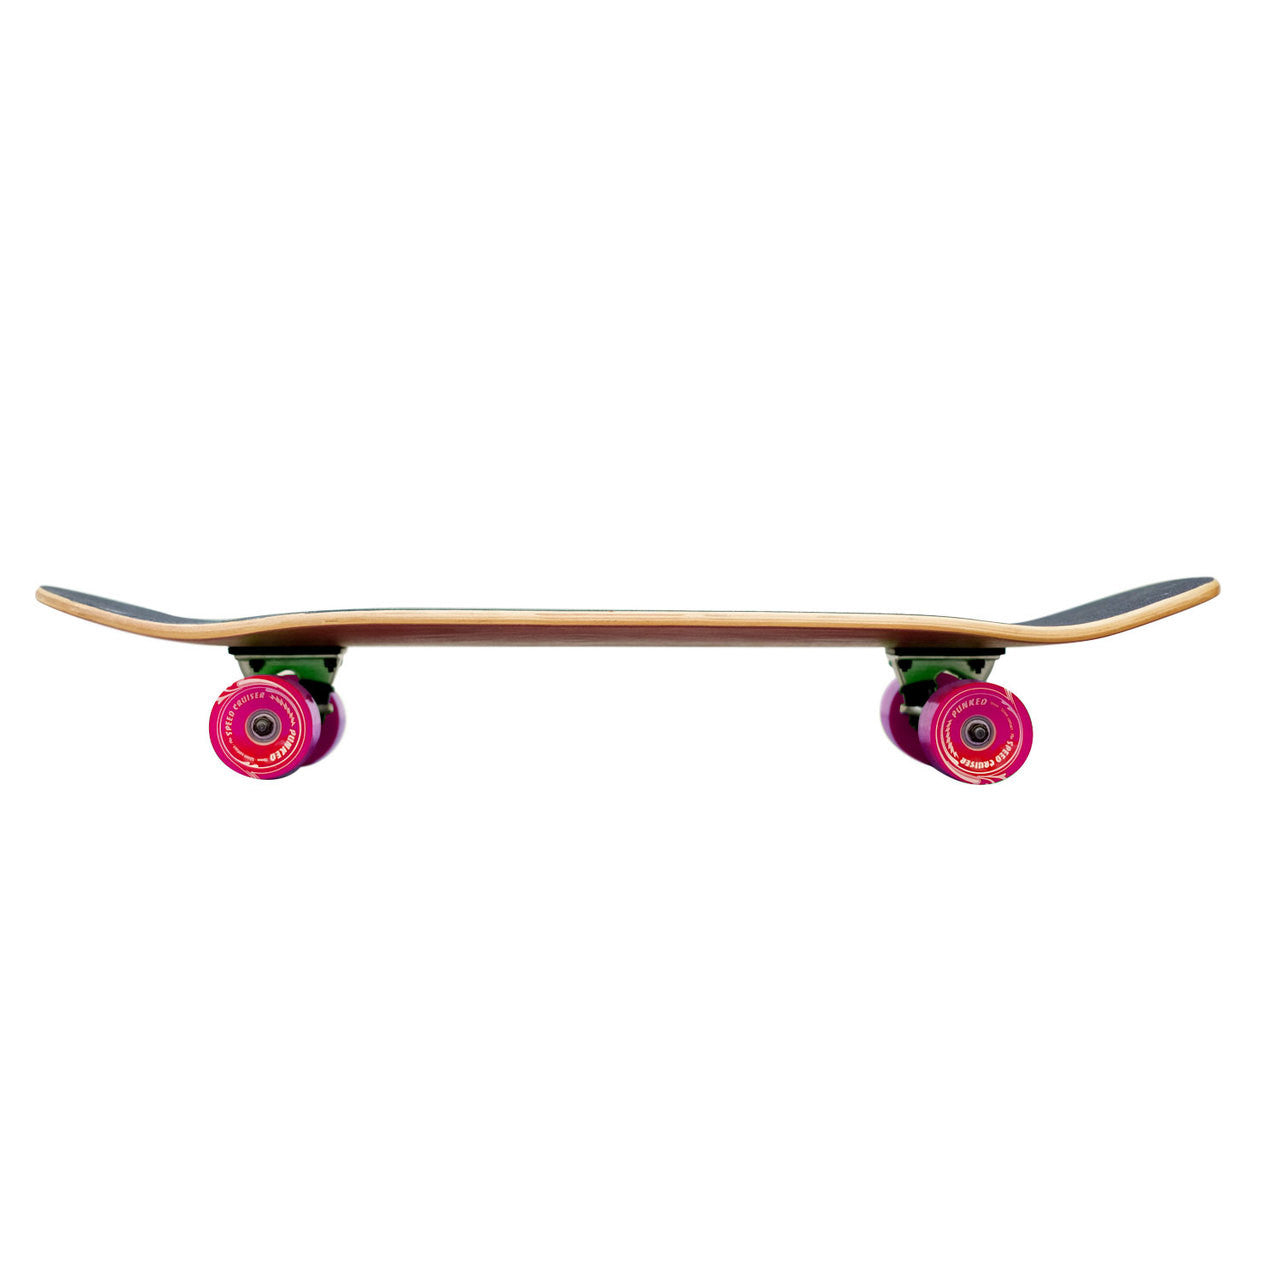 Yocaher Old School Longboard Complete - The Bird Series Green